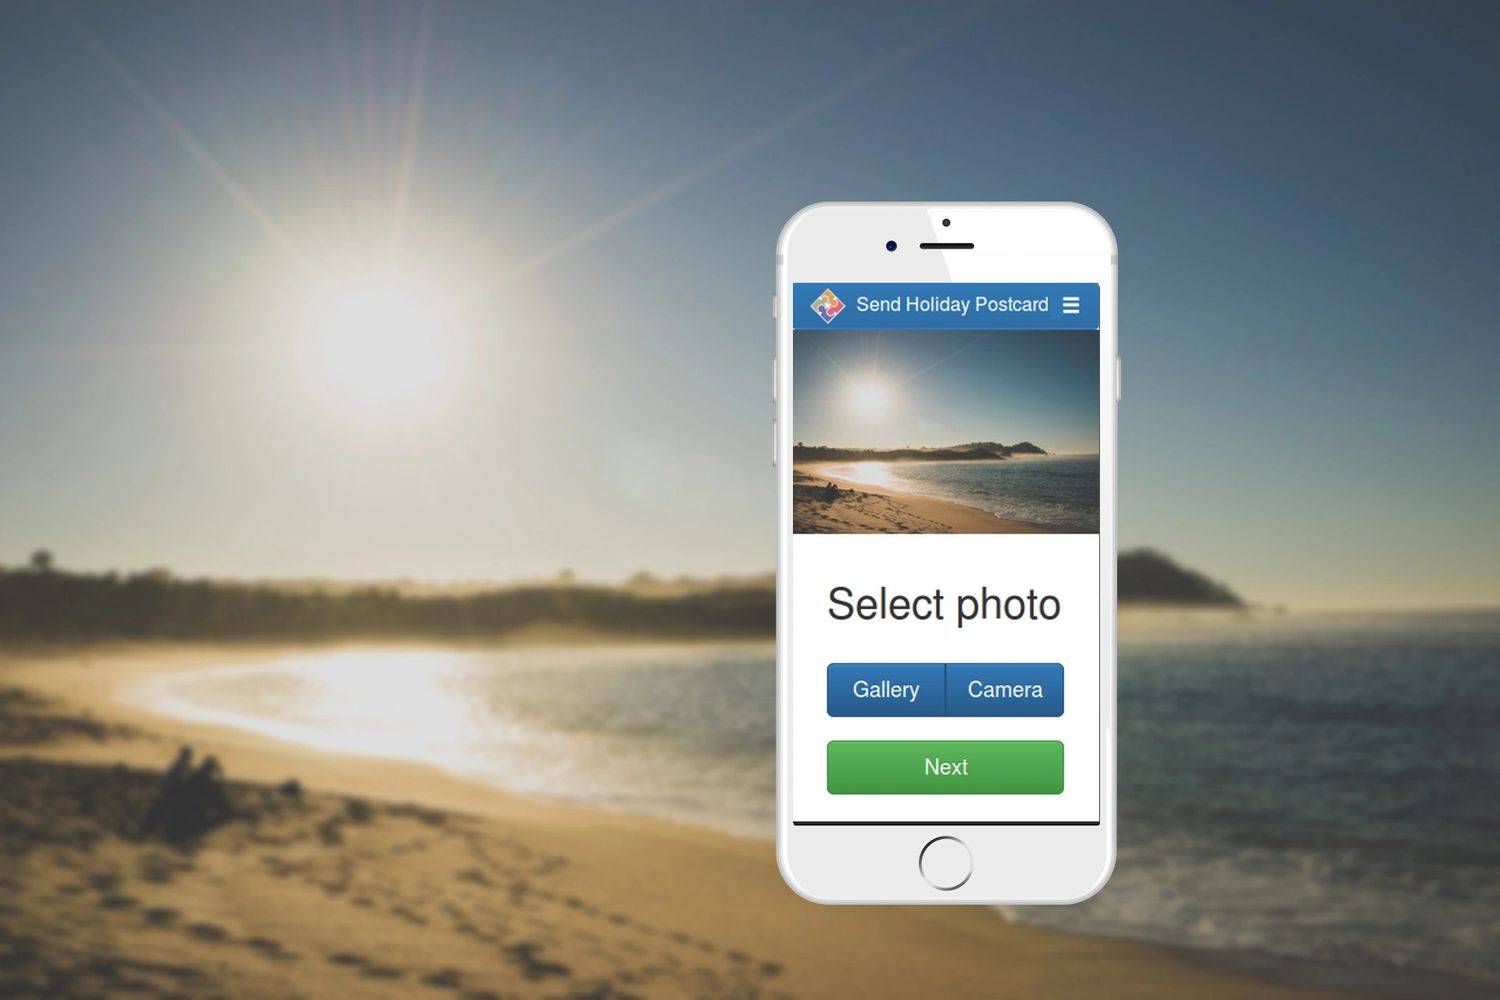 Send Holiday Postcard app is a PAYG Service for an iPhone, Android Phone, iPad,  Tablet or Computer.